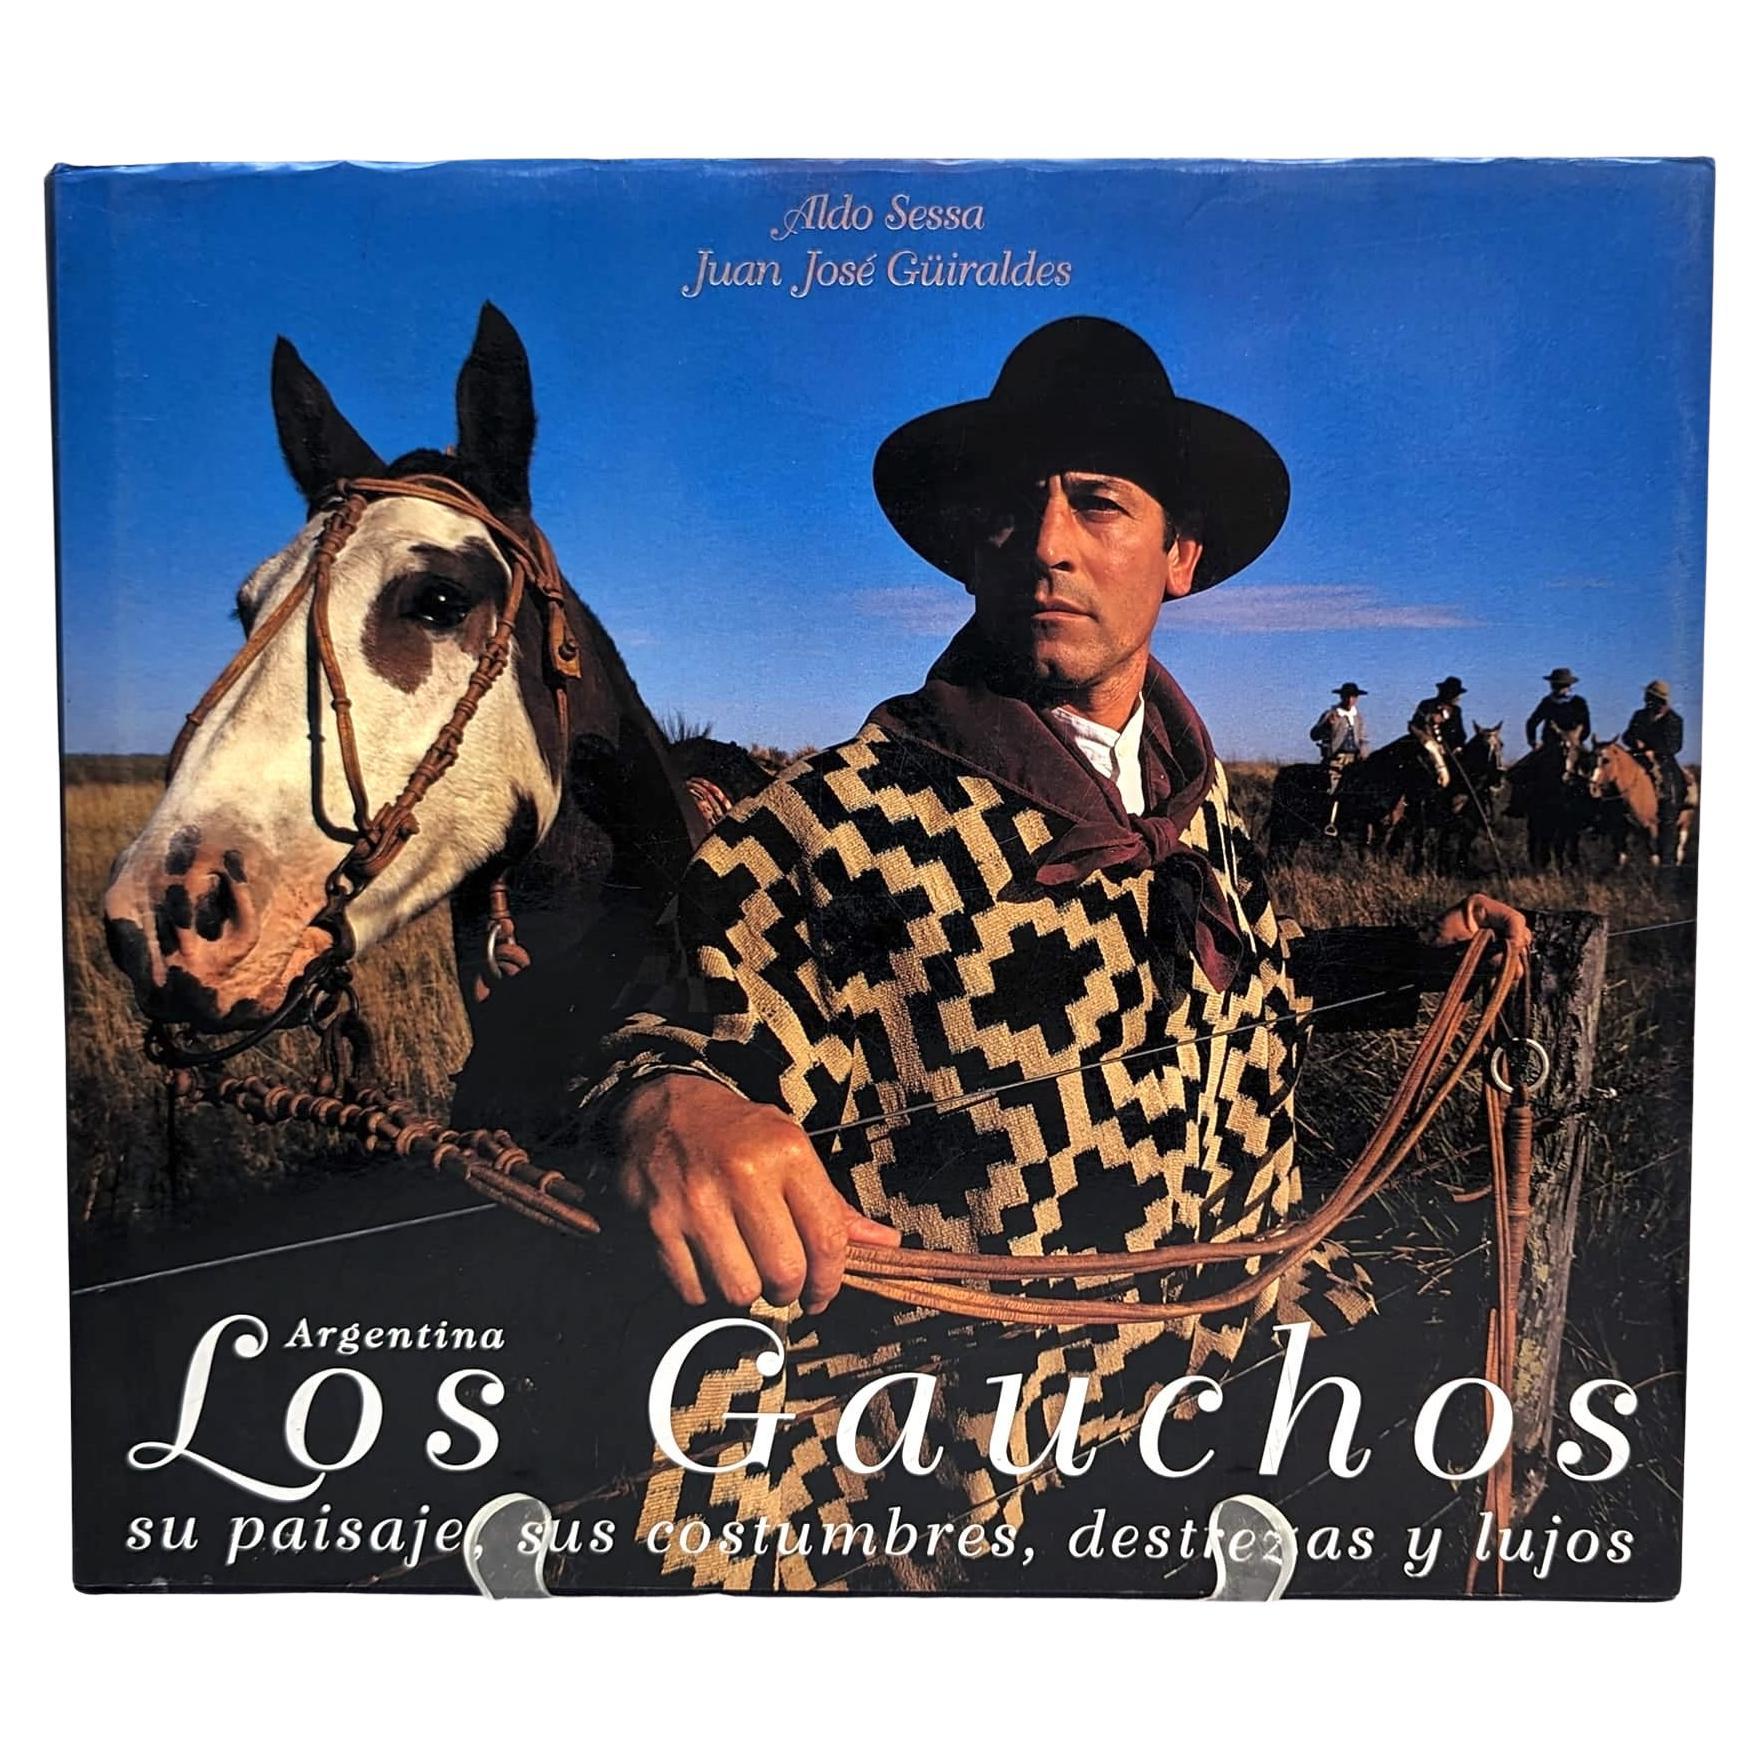 The Gauchos: Their Landscape, Customs, Skills, and Luxuries, by Aldo Sessa For Sale